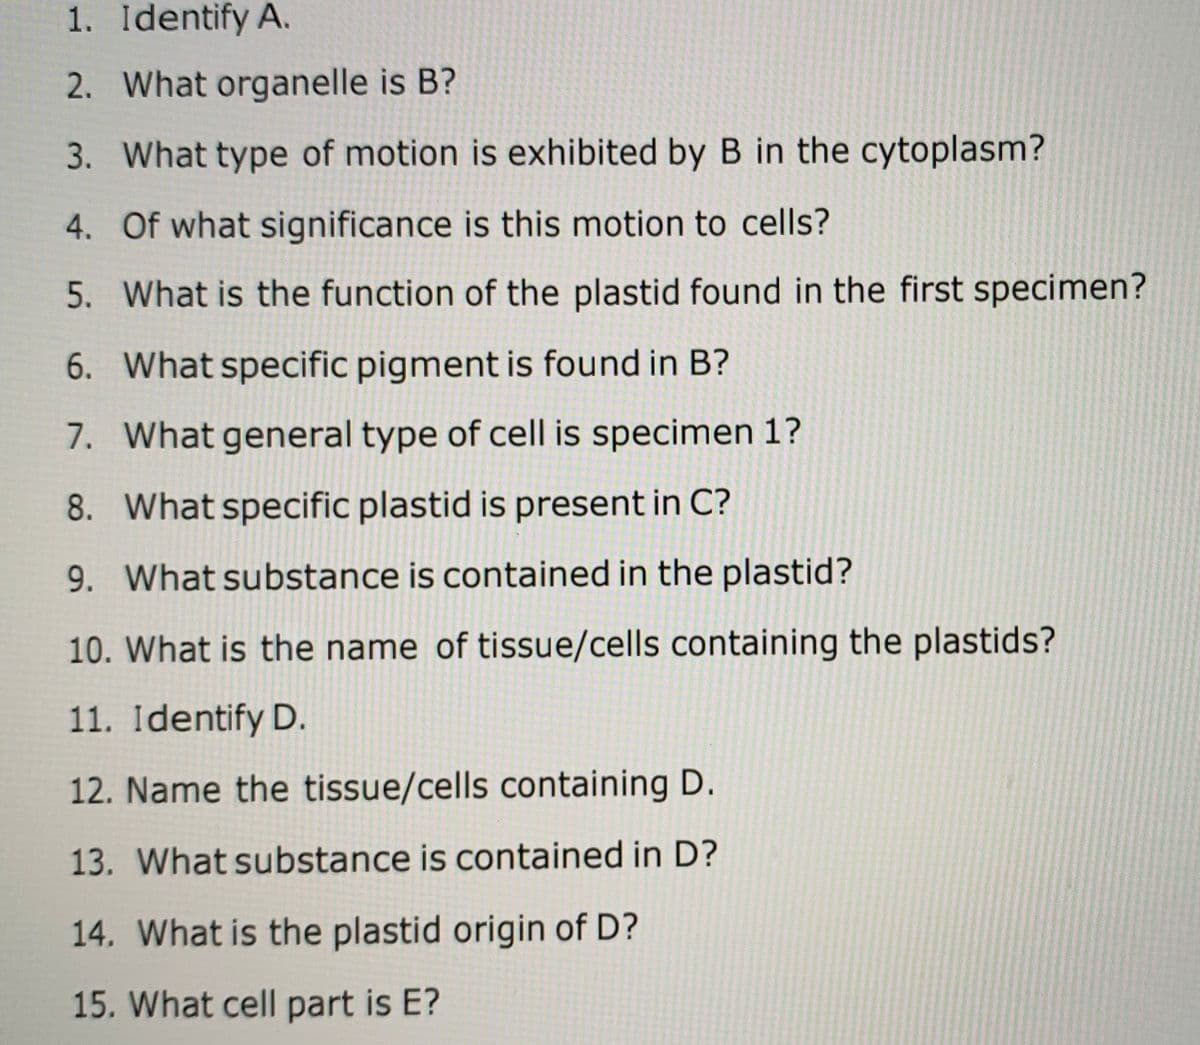 1. Identify A.
2. What organelle is B?
3. What type of motion is exhibited by B in the cytoplasm?
4. Of what significance is this motion to cells?
5. What is the function of the plastid found in the first specimen?
6. What specific pigment is found in B?
7. What general type of cell is specimen 1?
8. What specific plastid is present in C?
9. What substance is contained in the plastid?
10. What is the name of tissue/cells containing the plastids?
11. Identify D.
12. Name the tissue/cells containing D.
13. What substance is contained in D?
14. What is the plastid origin of D?
15. What cell part is E?
